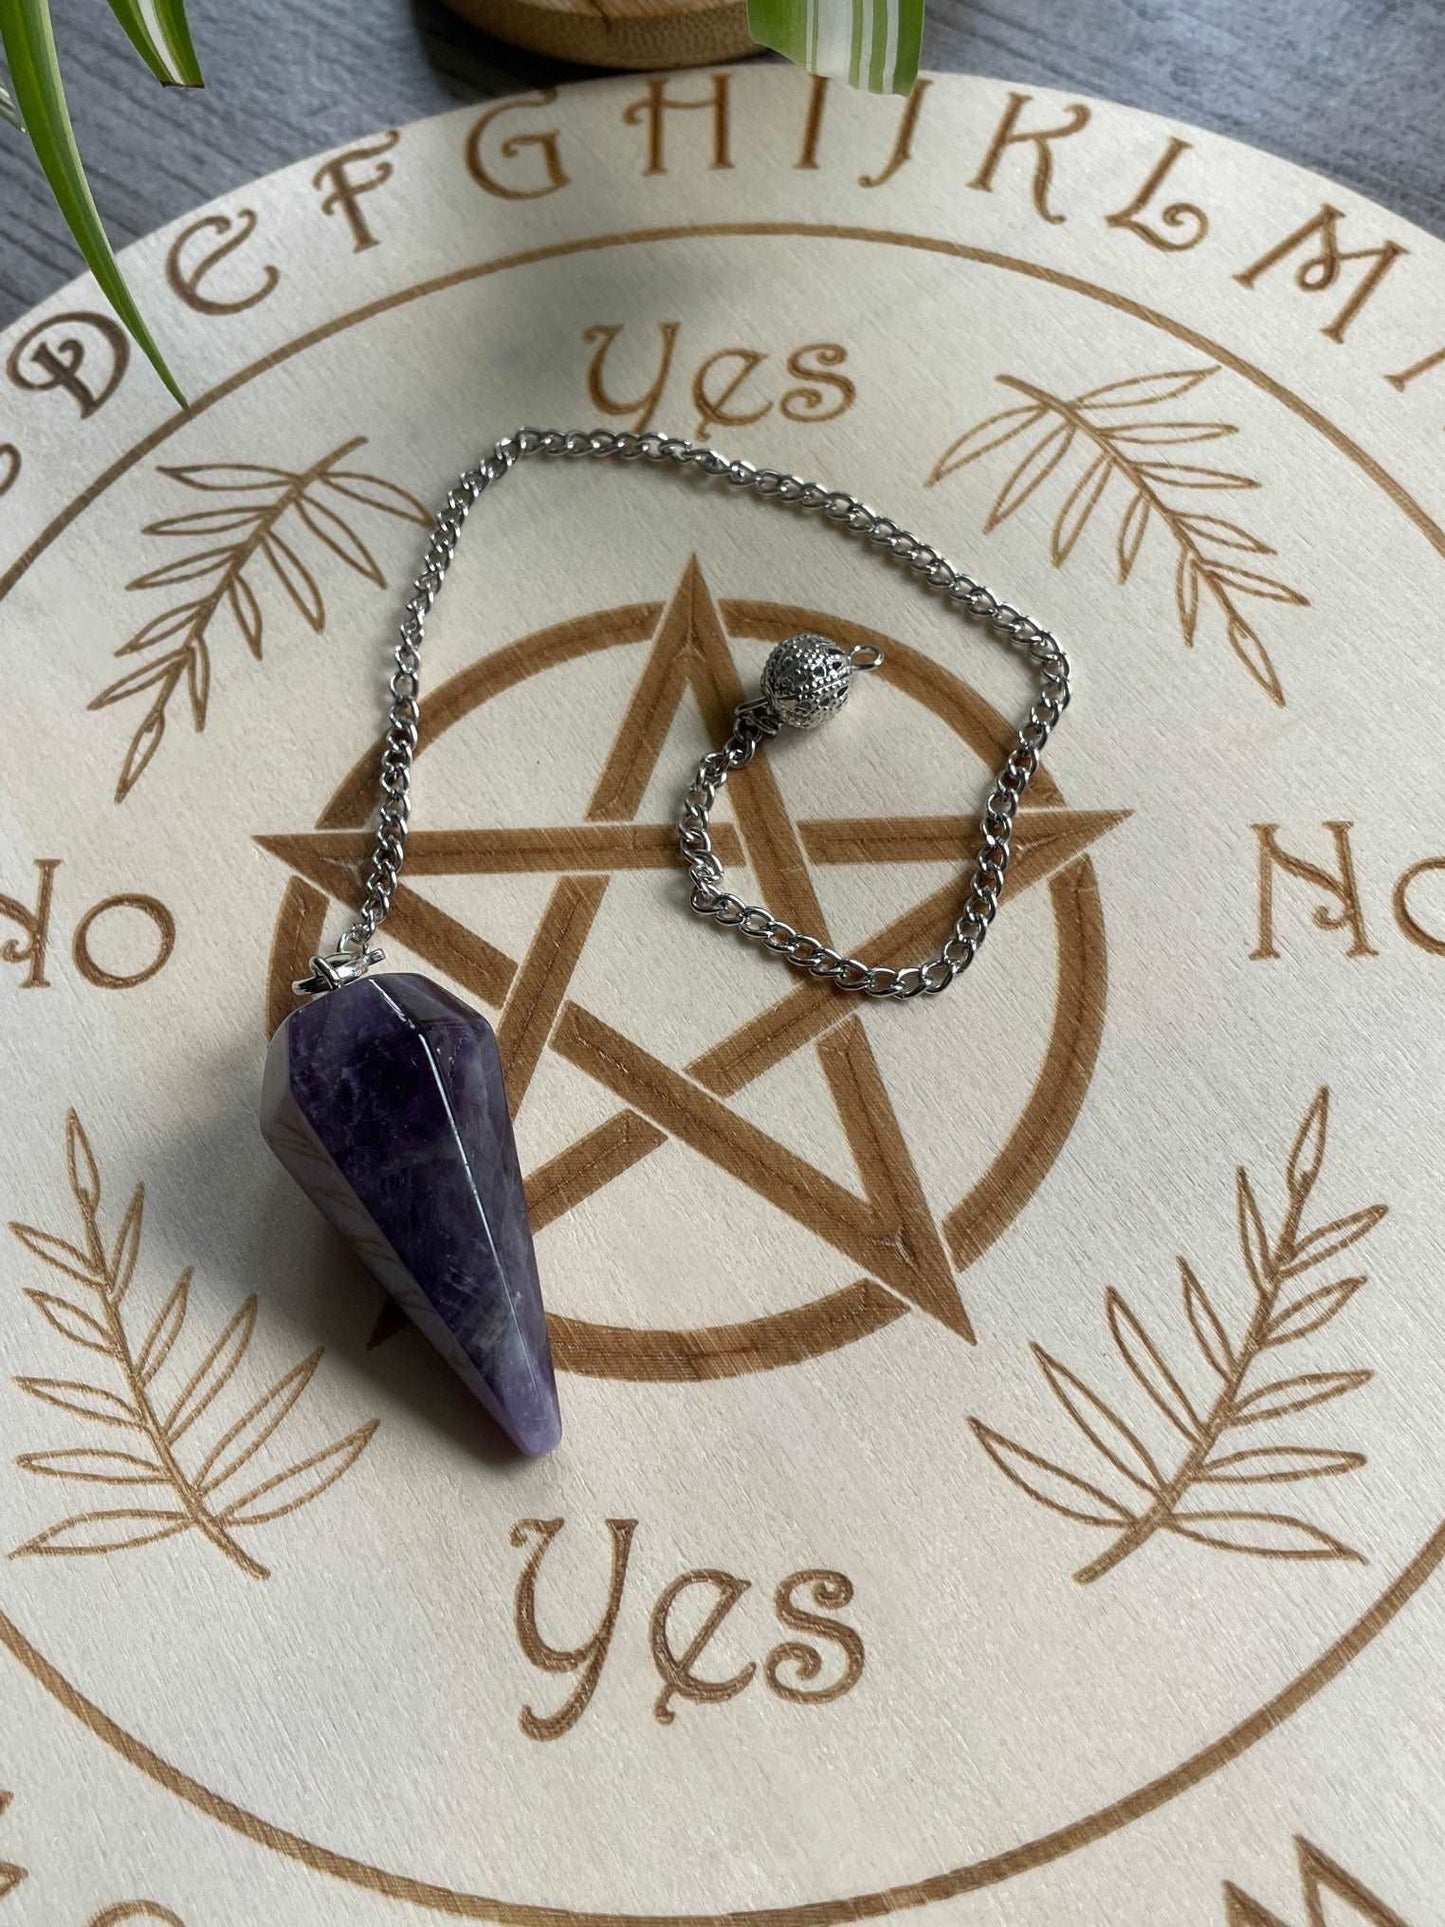 Pictured is an amethyst crystal pendulum.